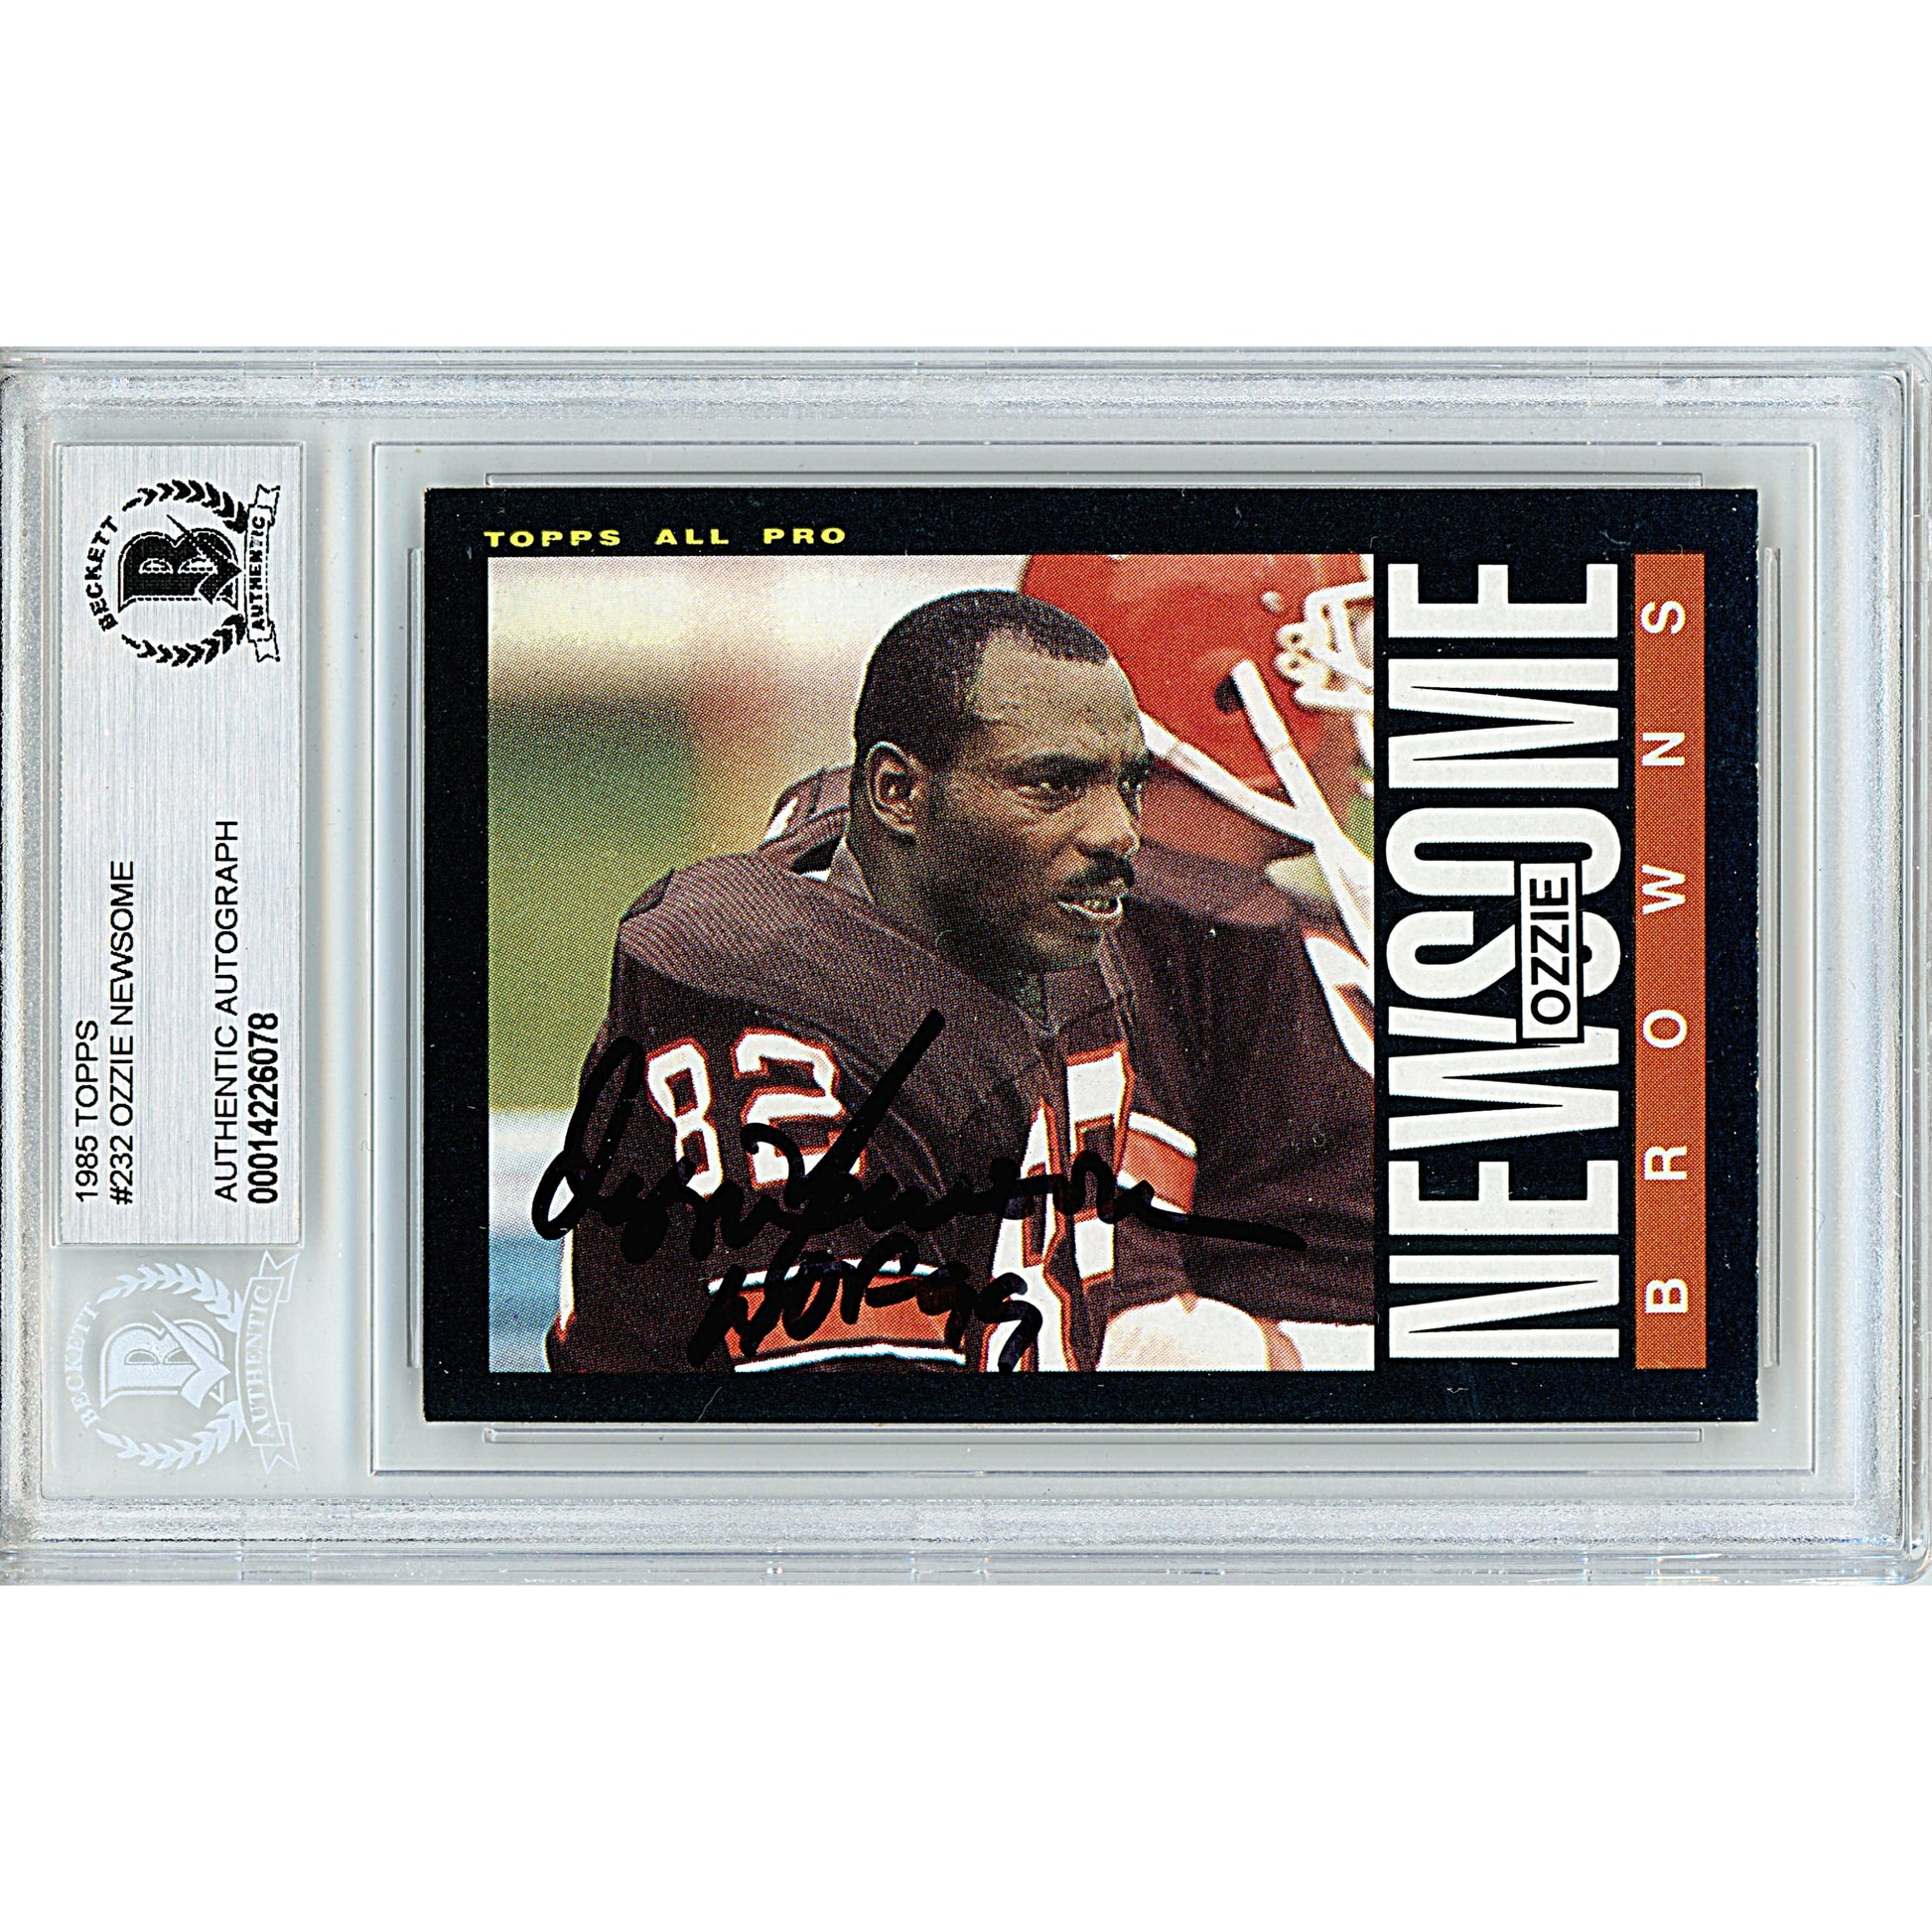 Footballs- Autographed- Ozzie Newsome Signed Cleveland Browns 1985 Topps Football Card Beckett BAS Slabbed 00014226078 - 101